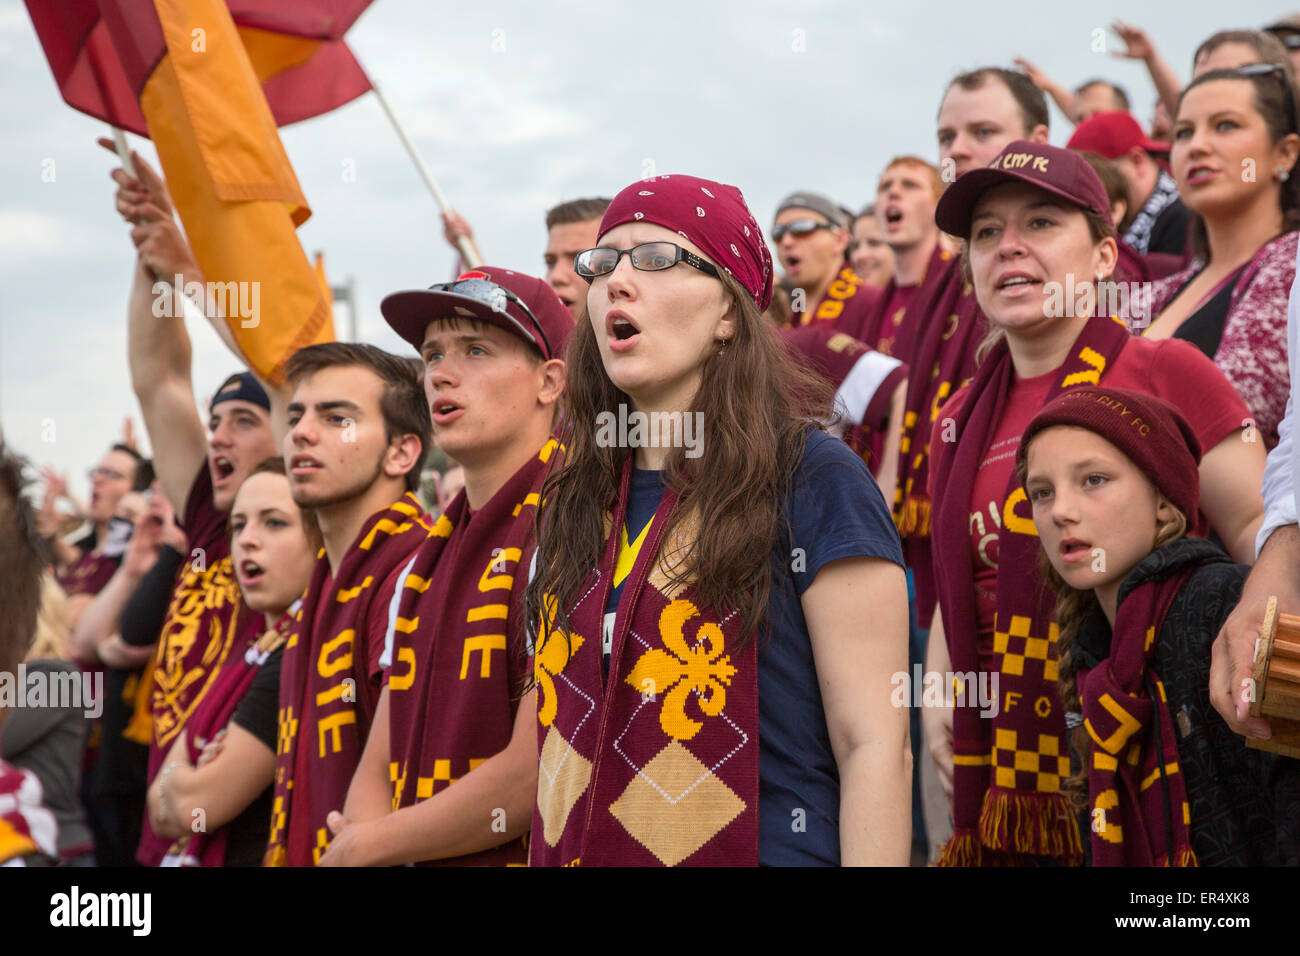 Detroit, Michigan - Soccer fans cheer their team, Detroit City FC, in a match against Muskegon Risers. Stock Photo